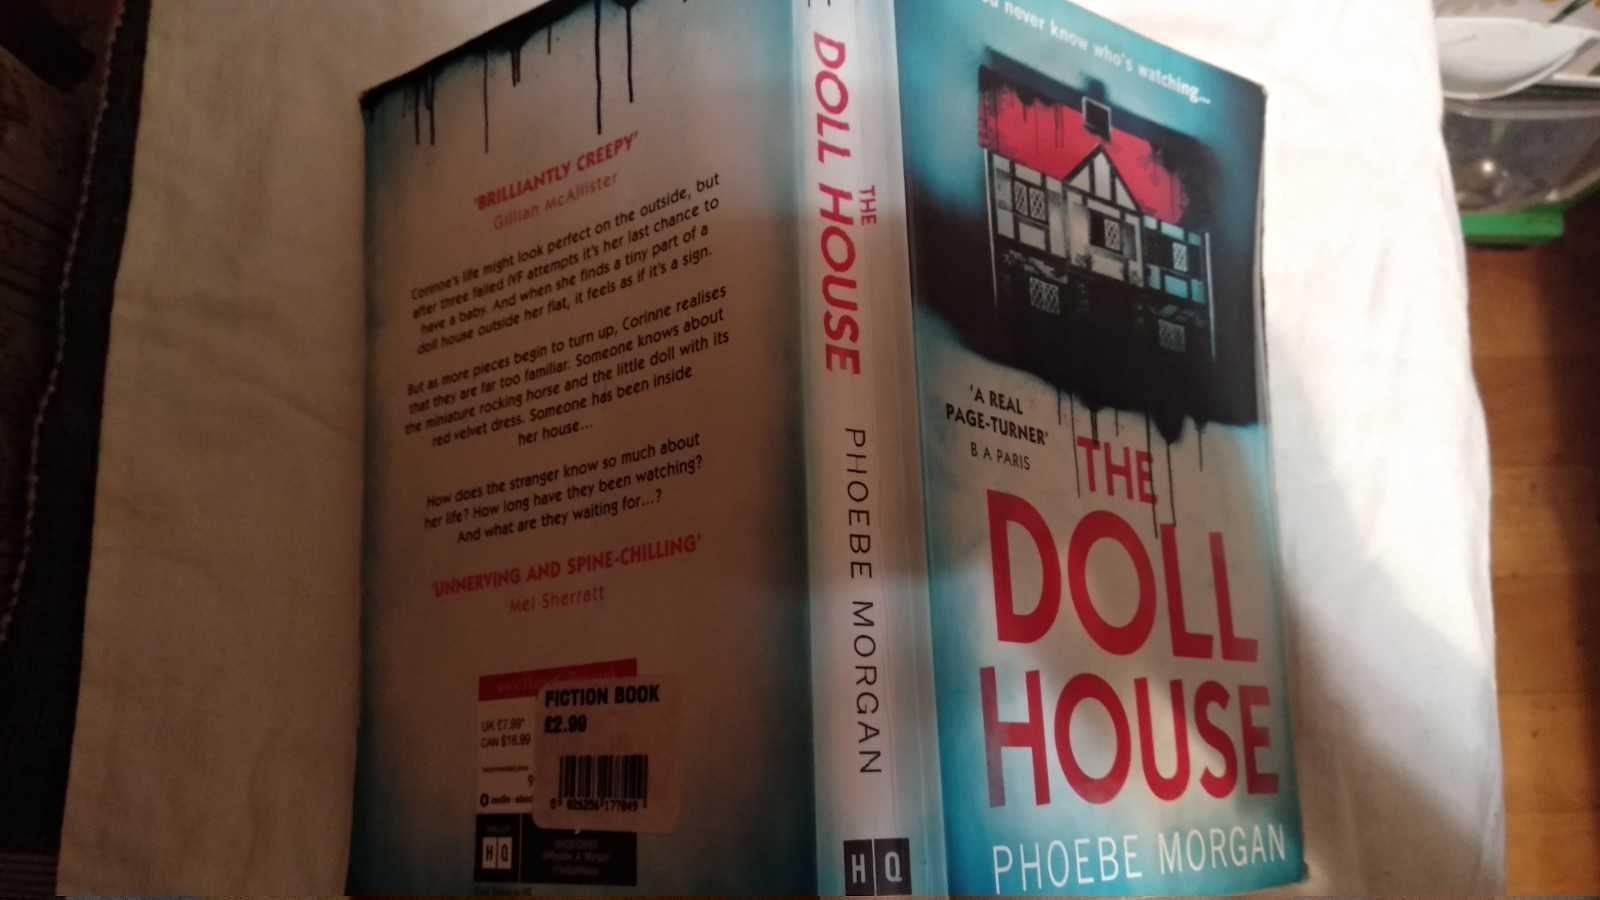 The Doll House by Phoebe Morgan